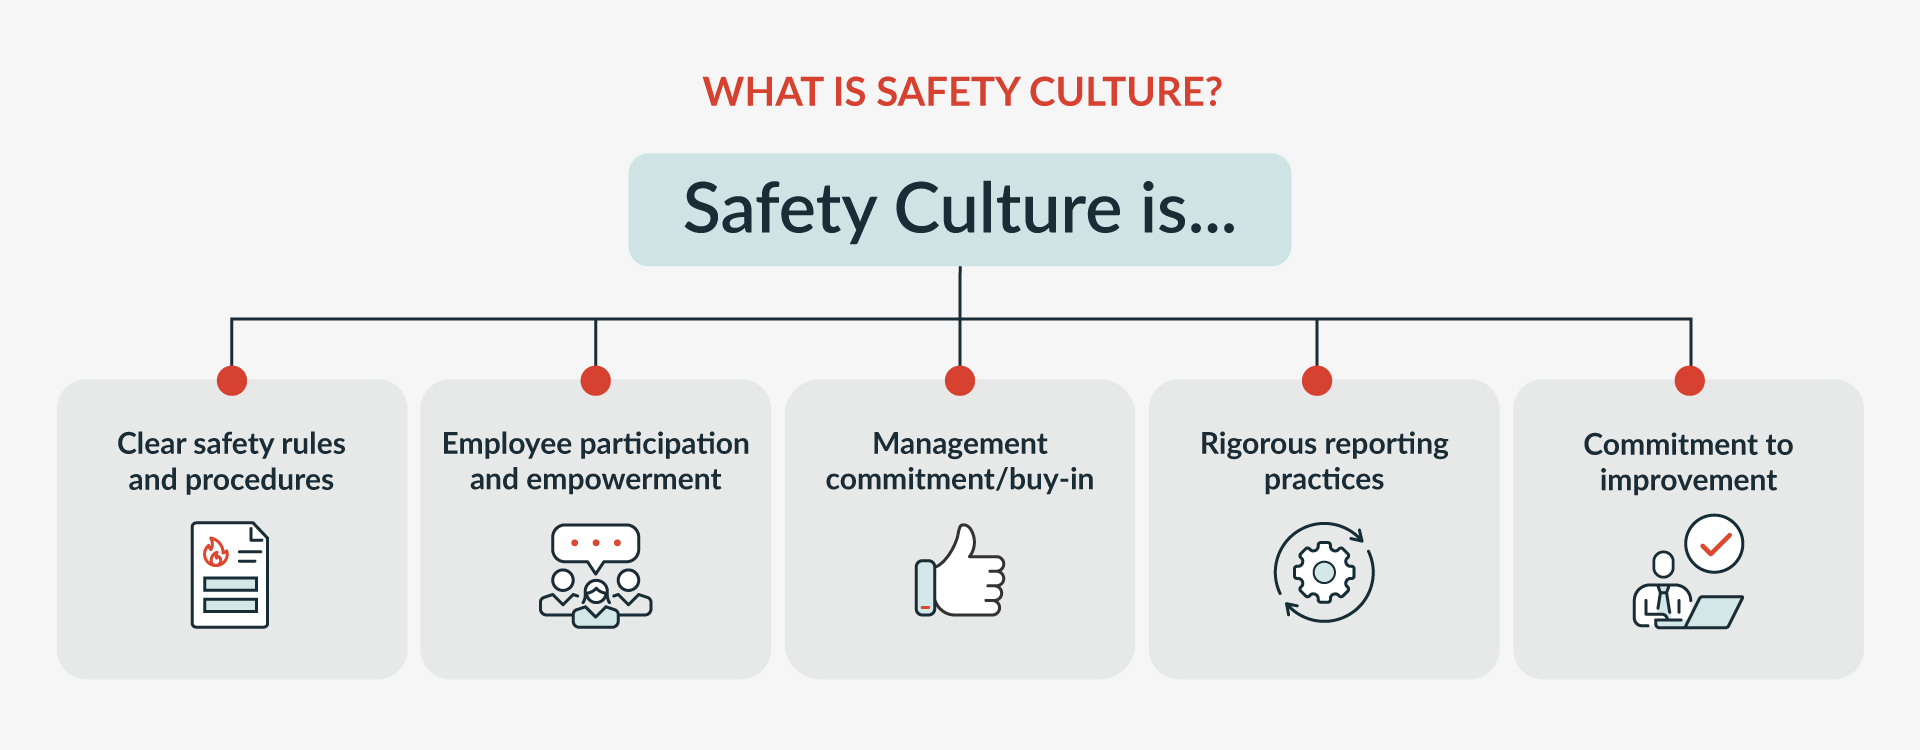 Alertmedia_Blog-SafetyCulture-Examples-inline-What_is_safety_culture